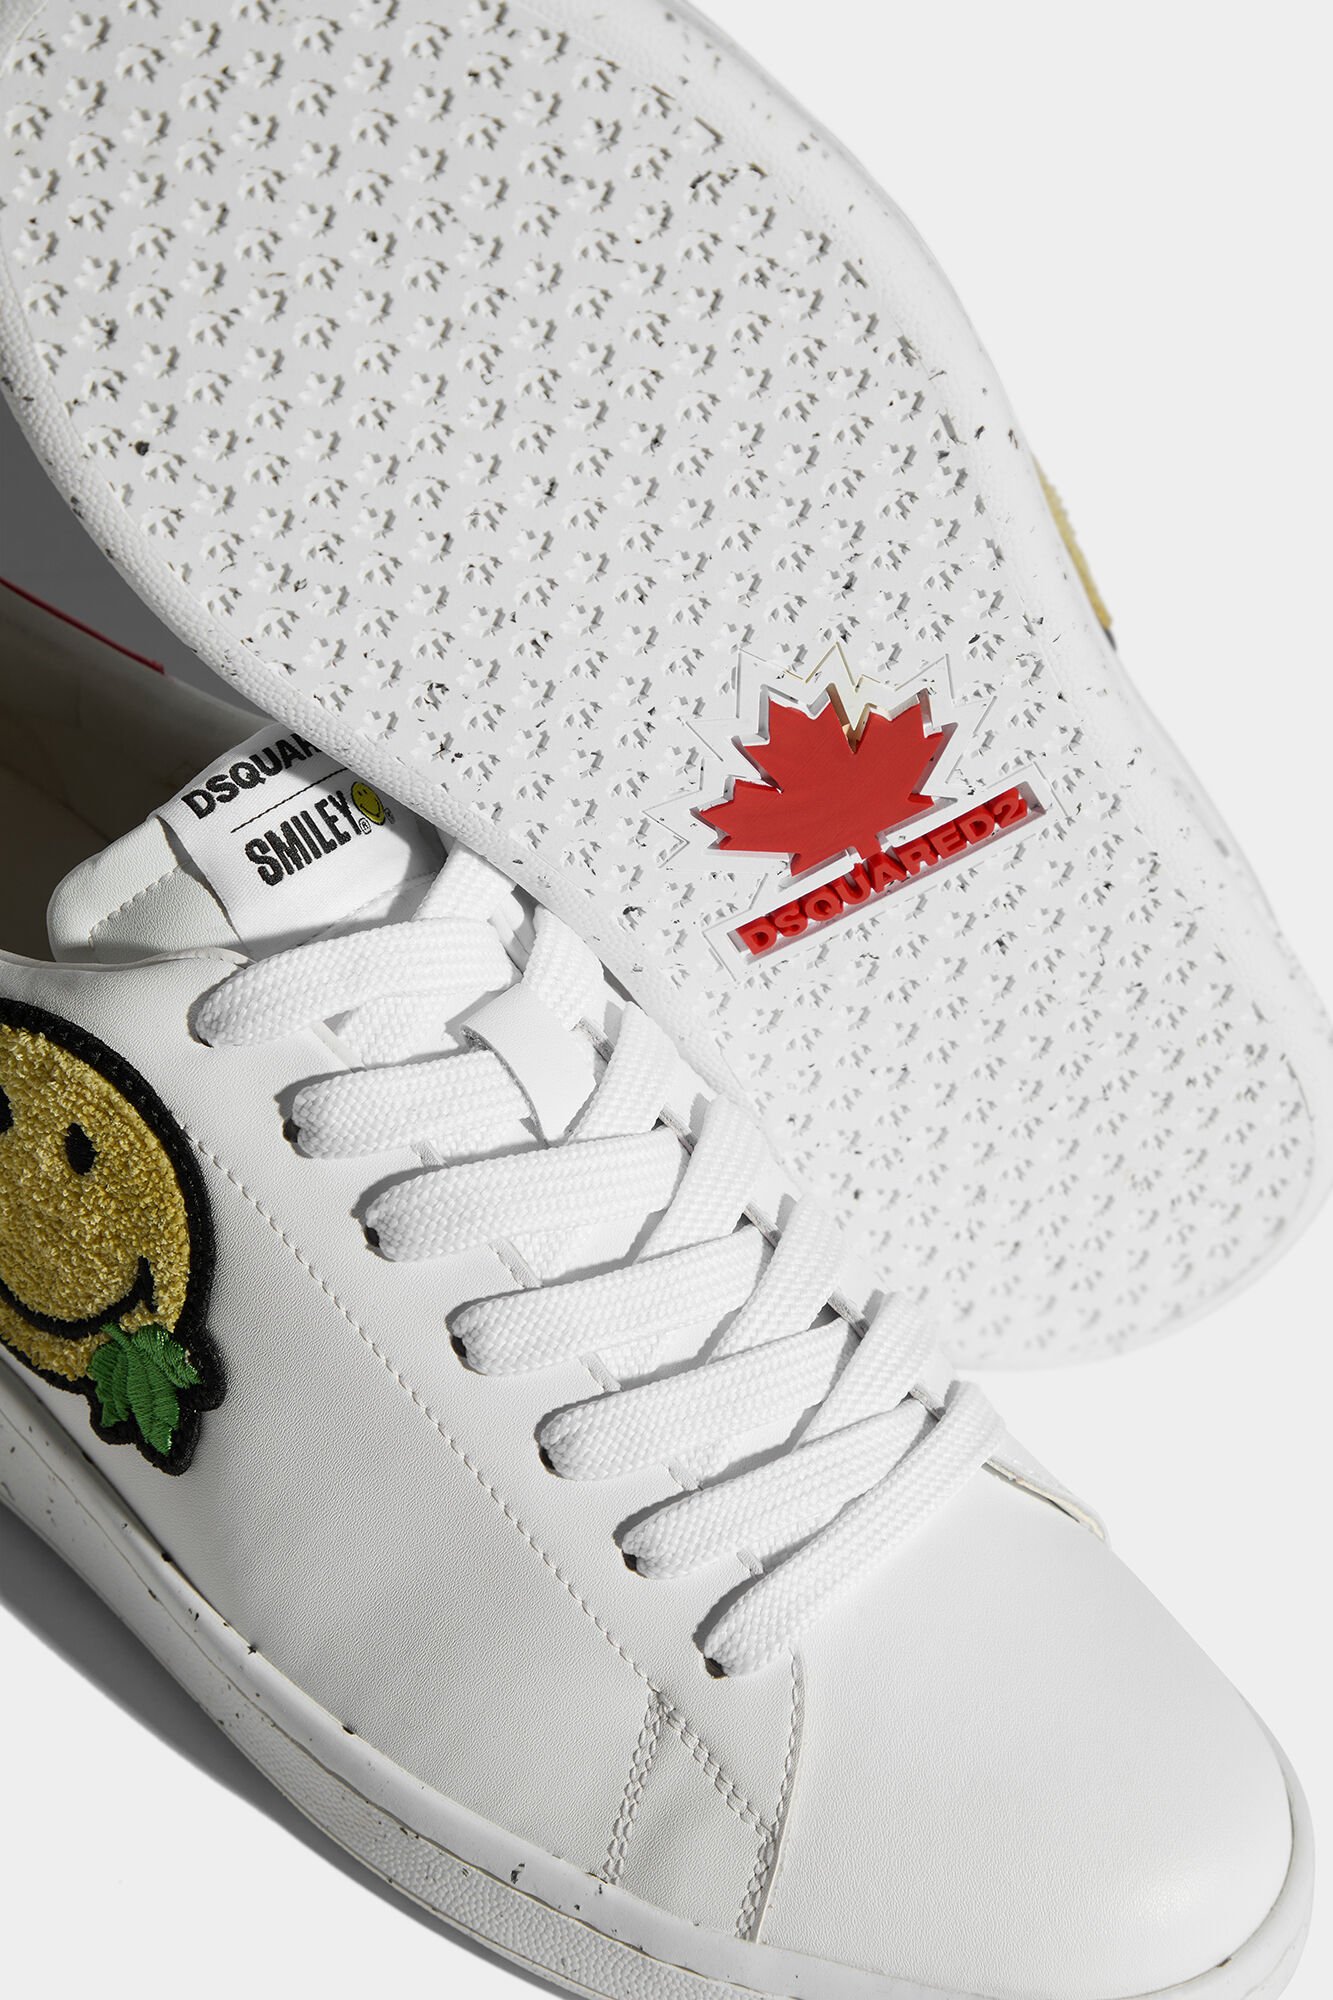 Smiley Bypell Boxer Sneakers